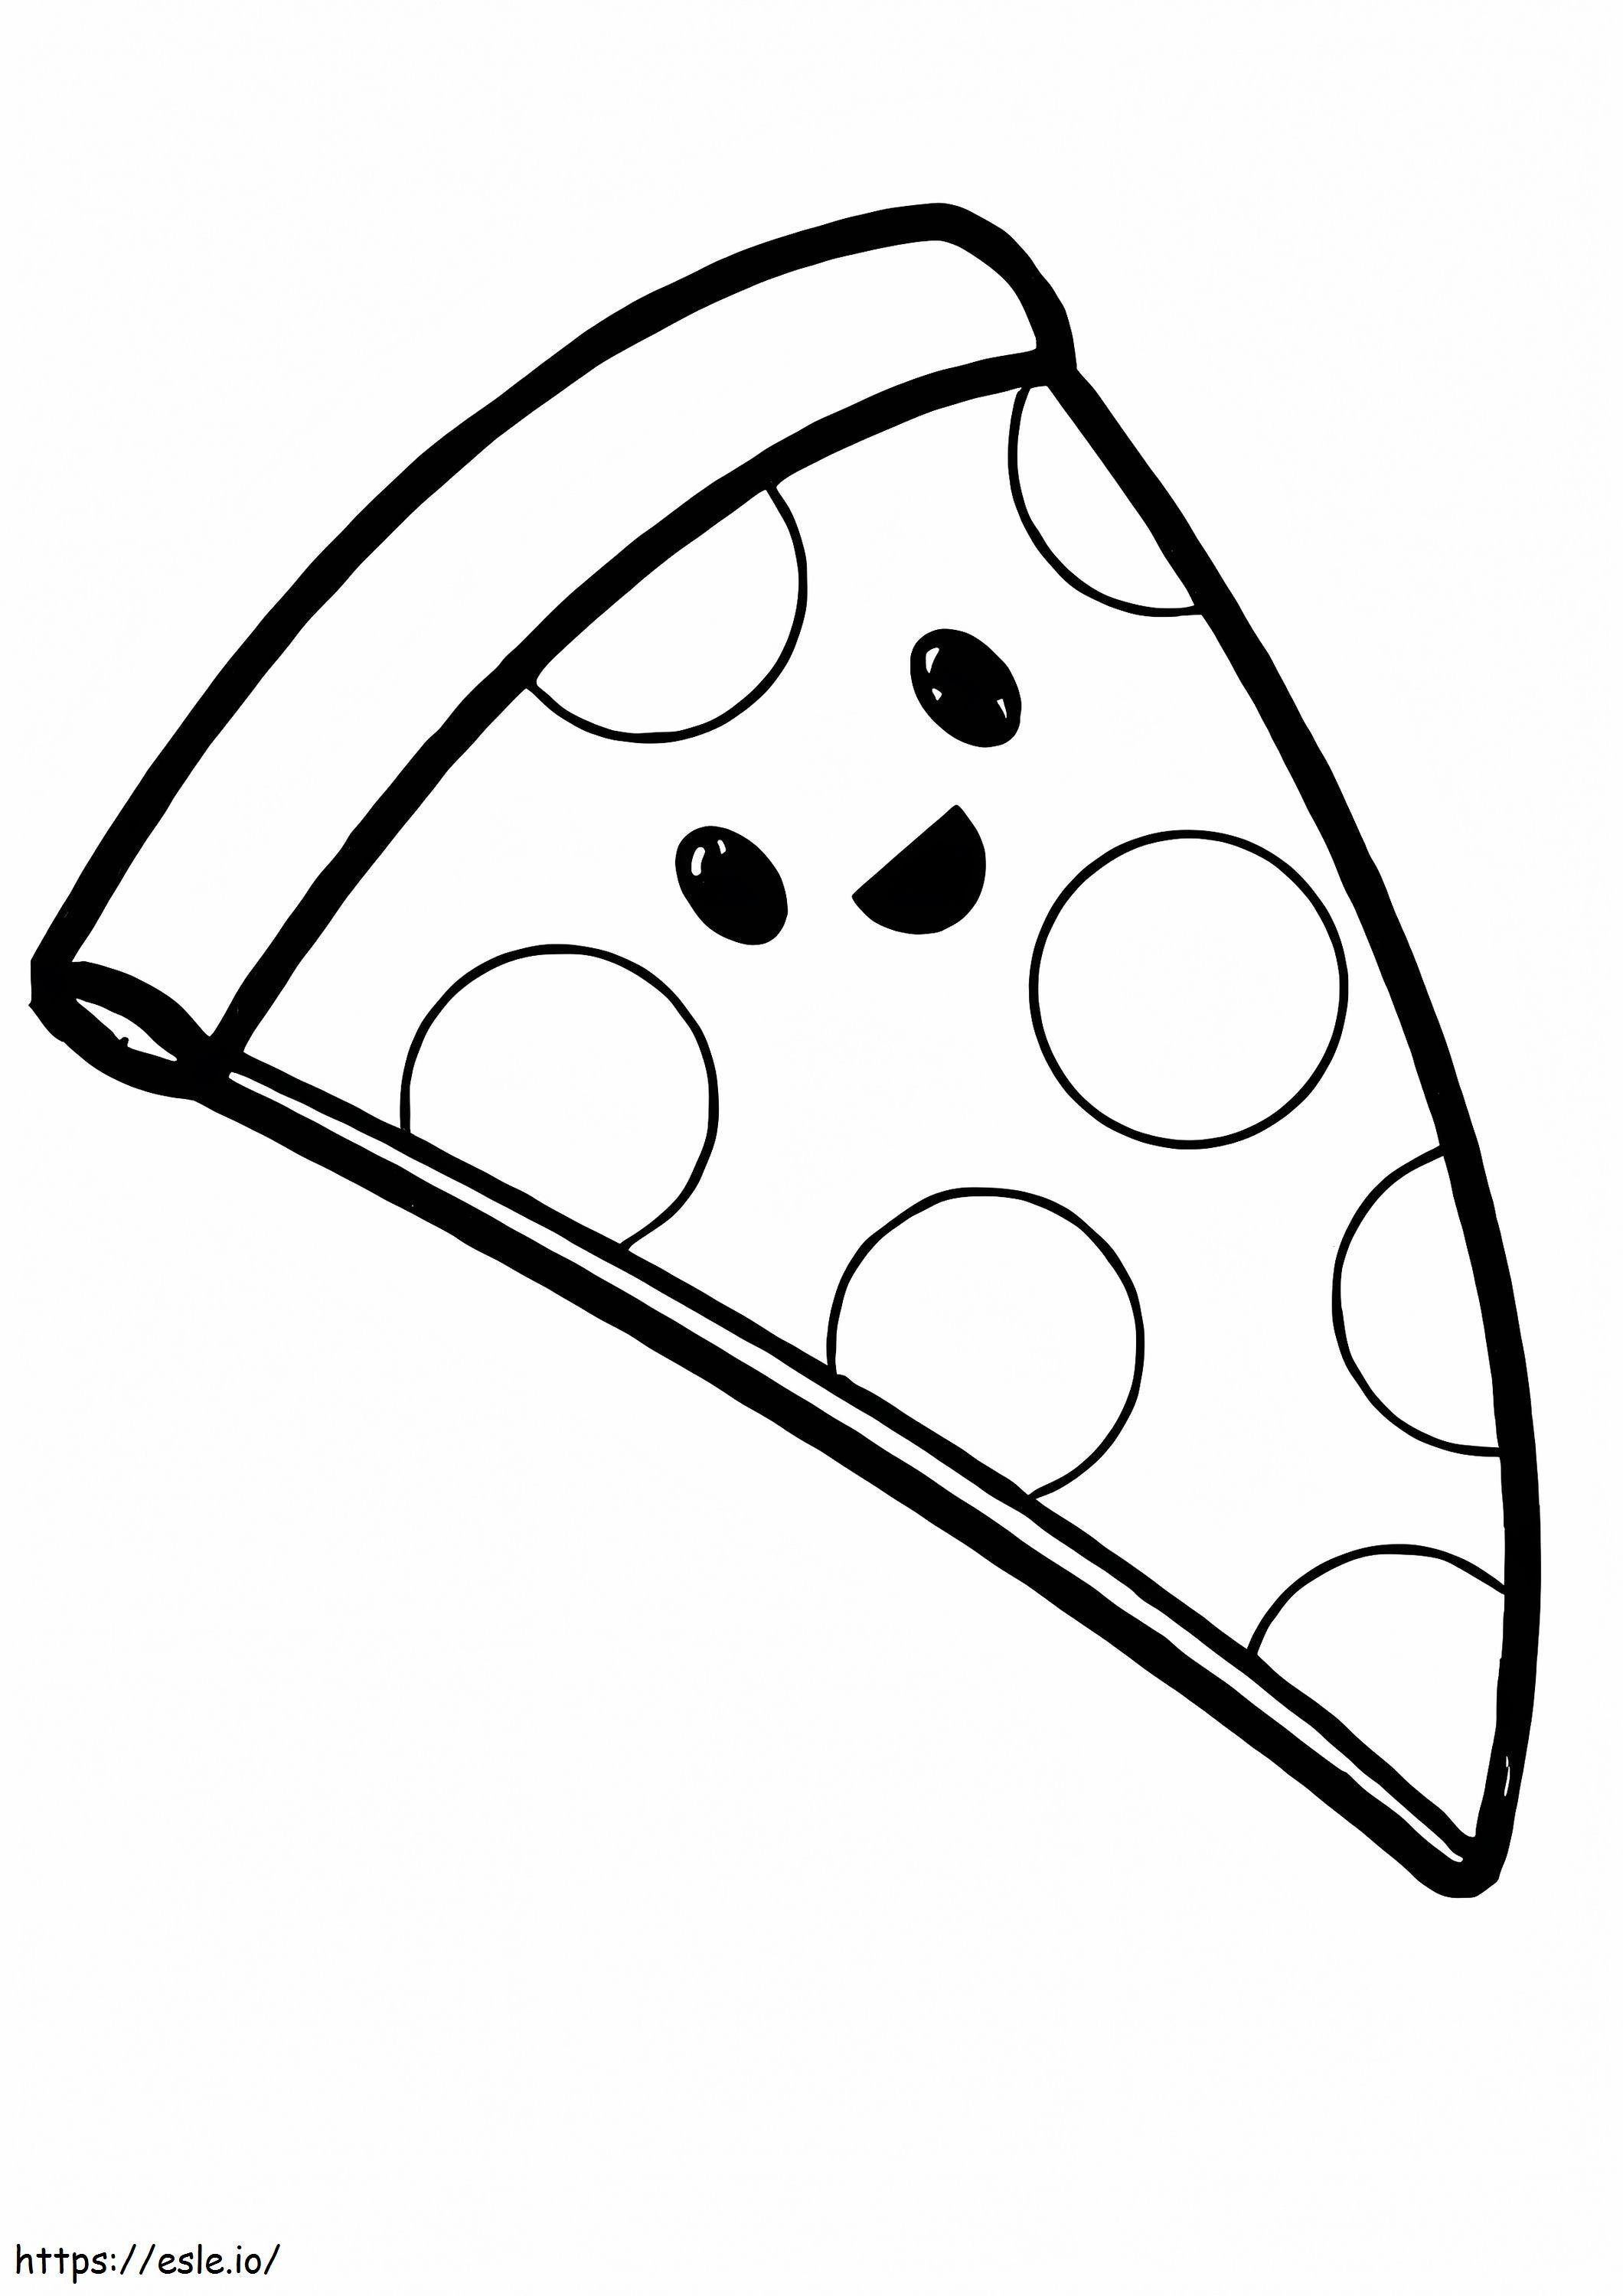 Cute Pizza Smiling coloring page